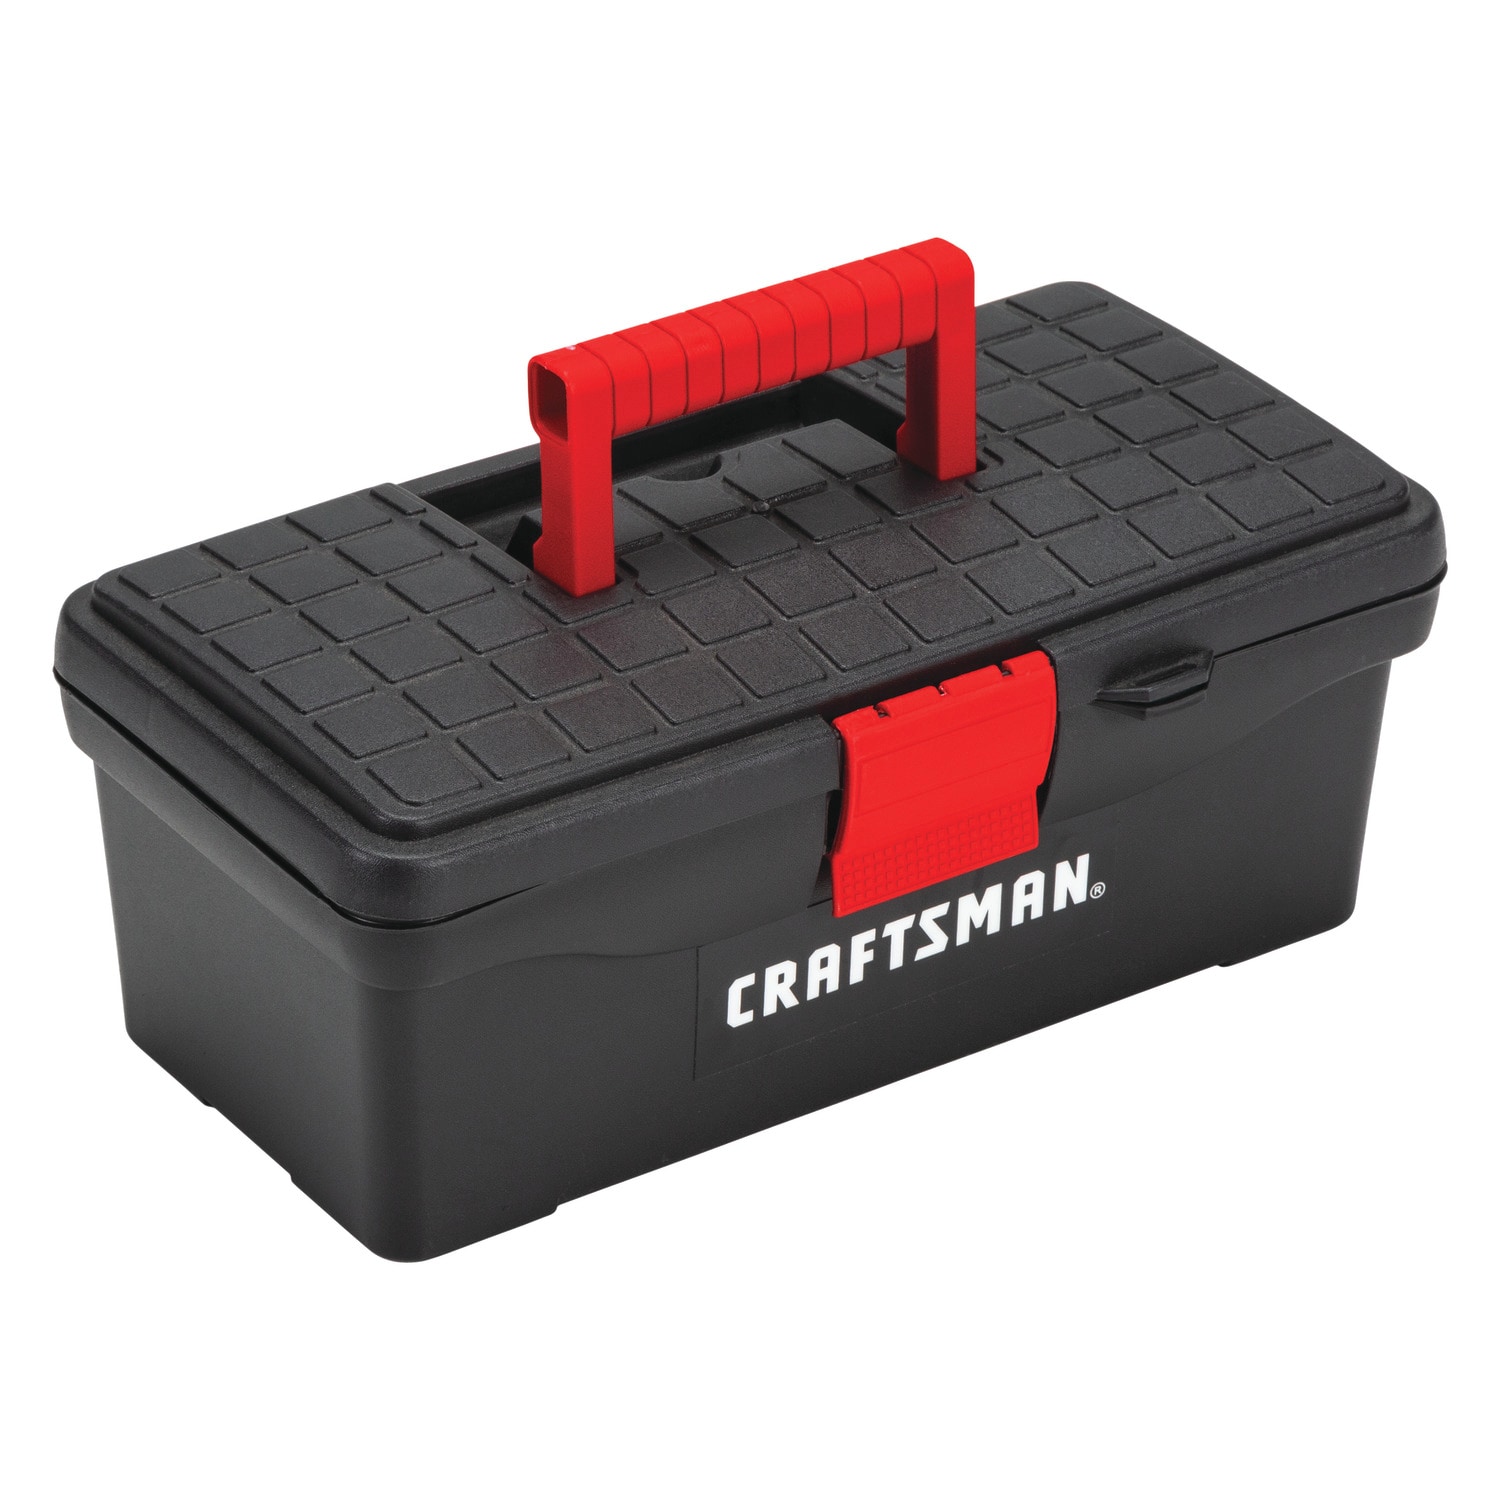 CRAFTSMAN 15.2-in Multiple Colors/Finishes Metal Wheels Lockable Tool ...